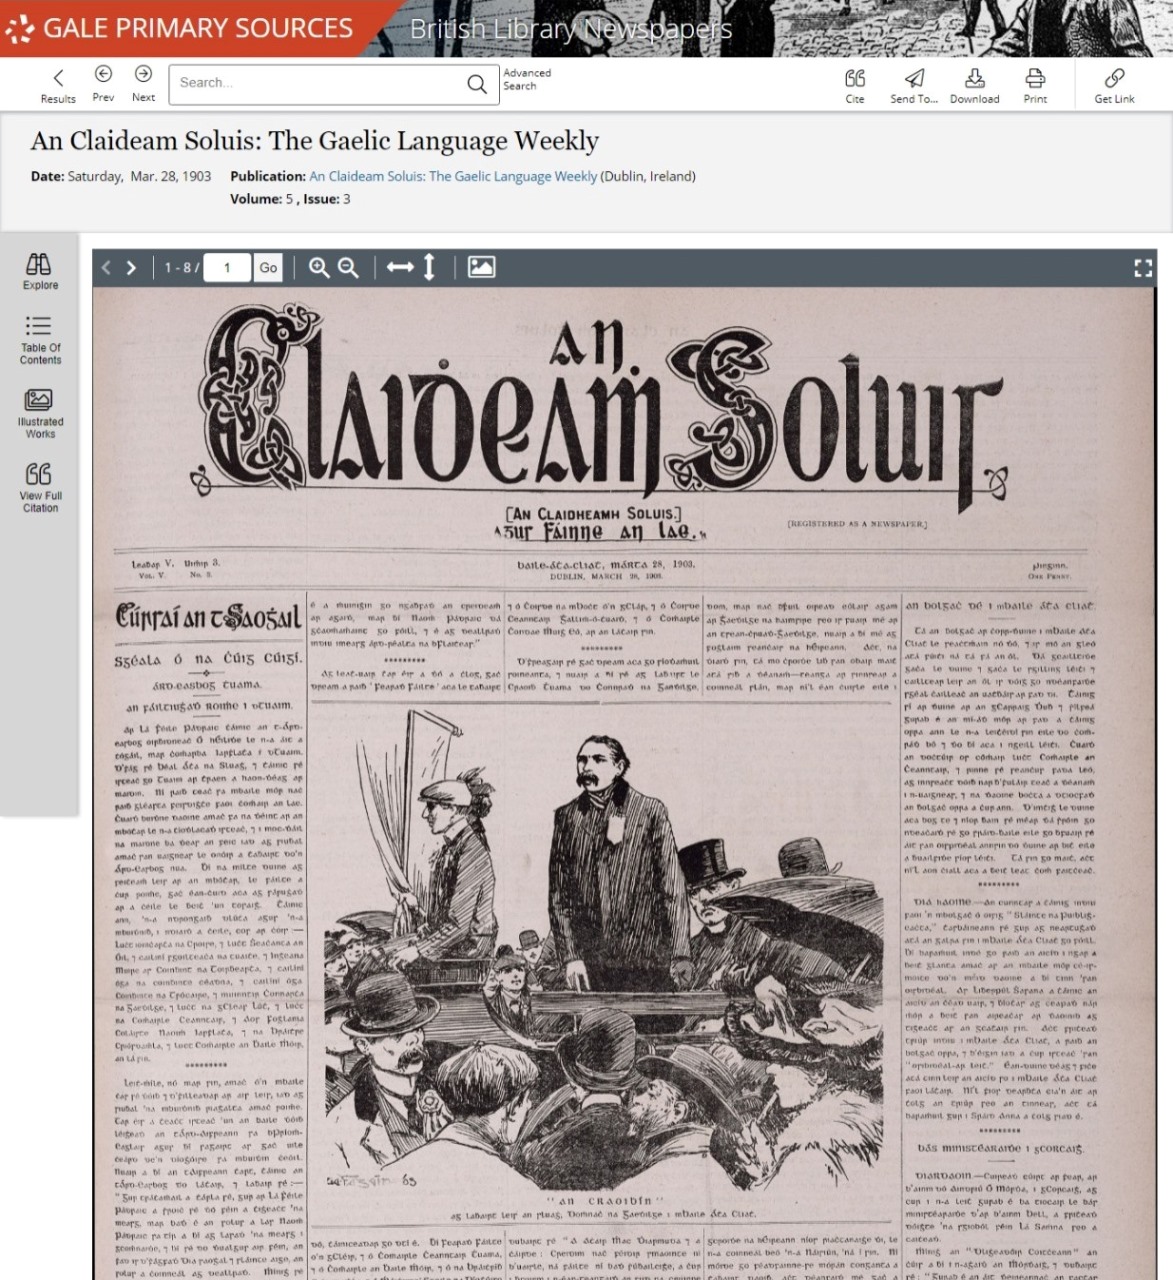 An Claideam Soluis: The Gaelic Language Weekly, 28 Mar. 1903, p. [1]. British Library Newspapers Part VI: Ireland, 1783-1950